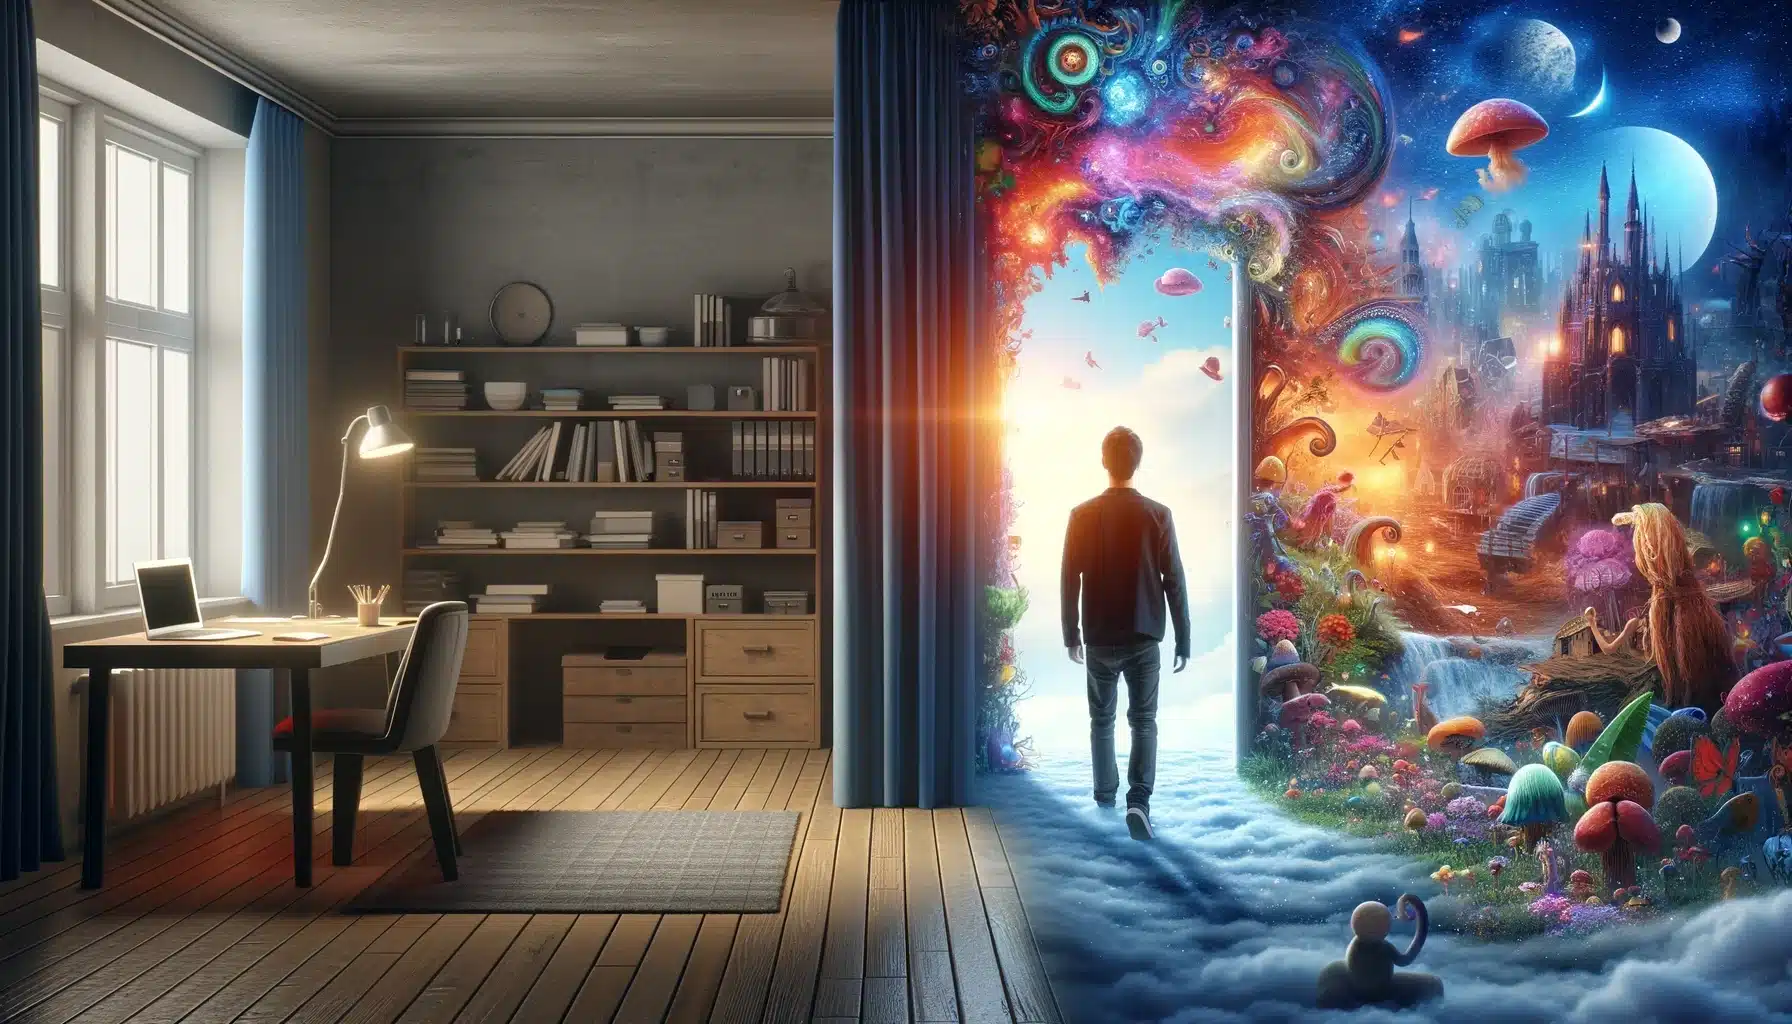 A person stands at the threshold between a standard room and a vibrant dream world, symbolizing the transition from everyday reality to the imaginative realm of Lucid Dreaming, as taught in our comprehensive course.